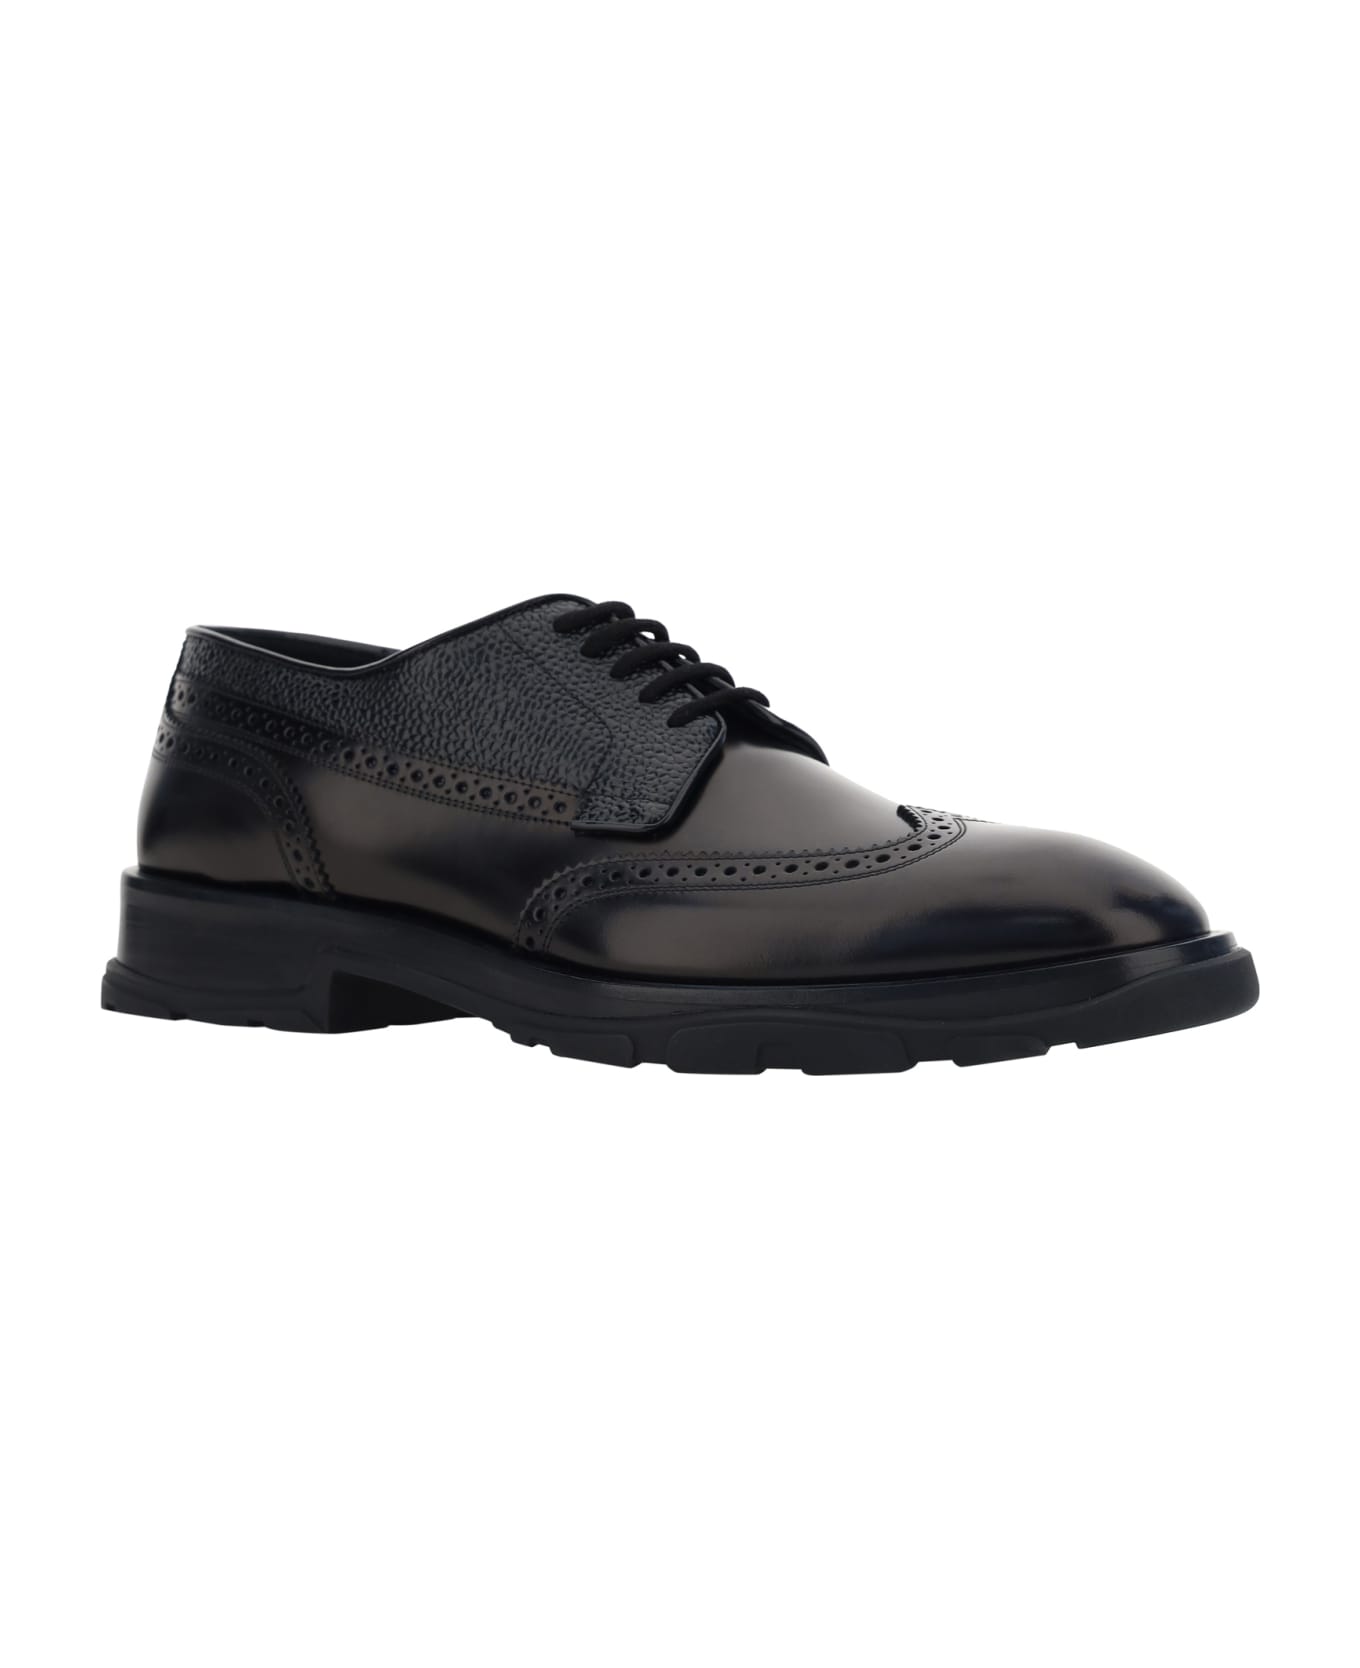 Alexander McQueen Brogues Leather Lace Up Shoes - Black